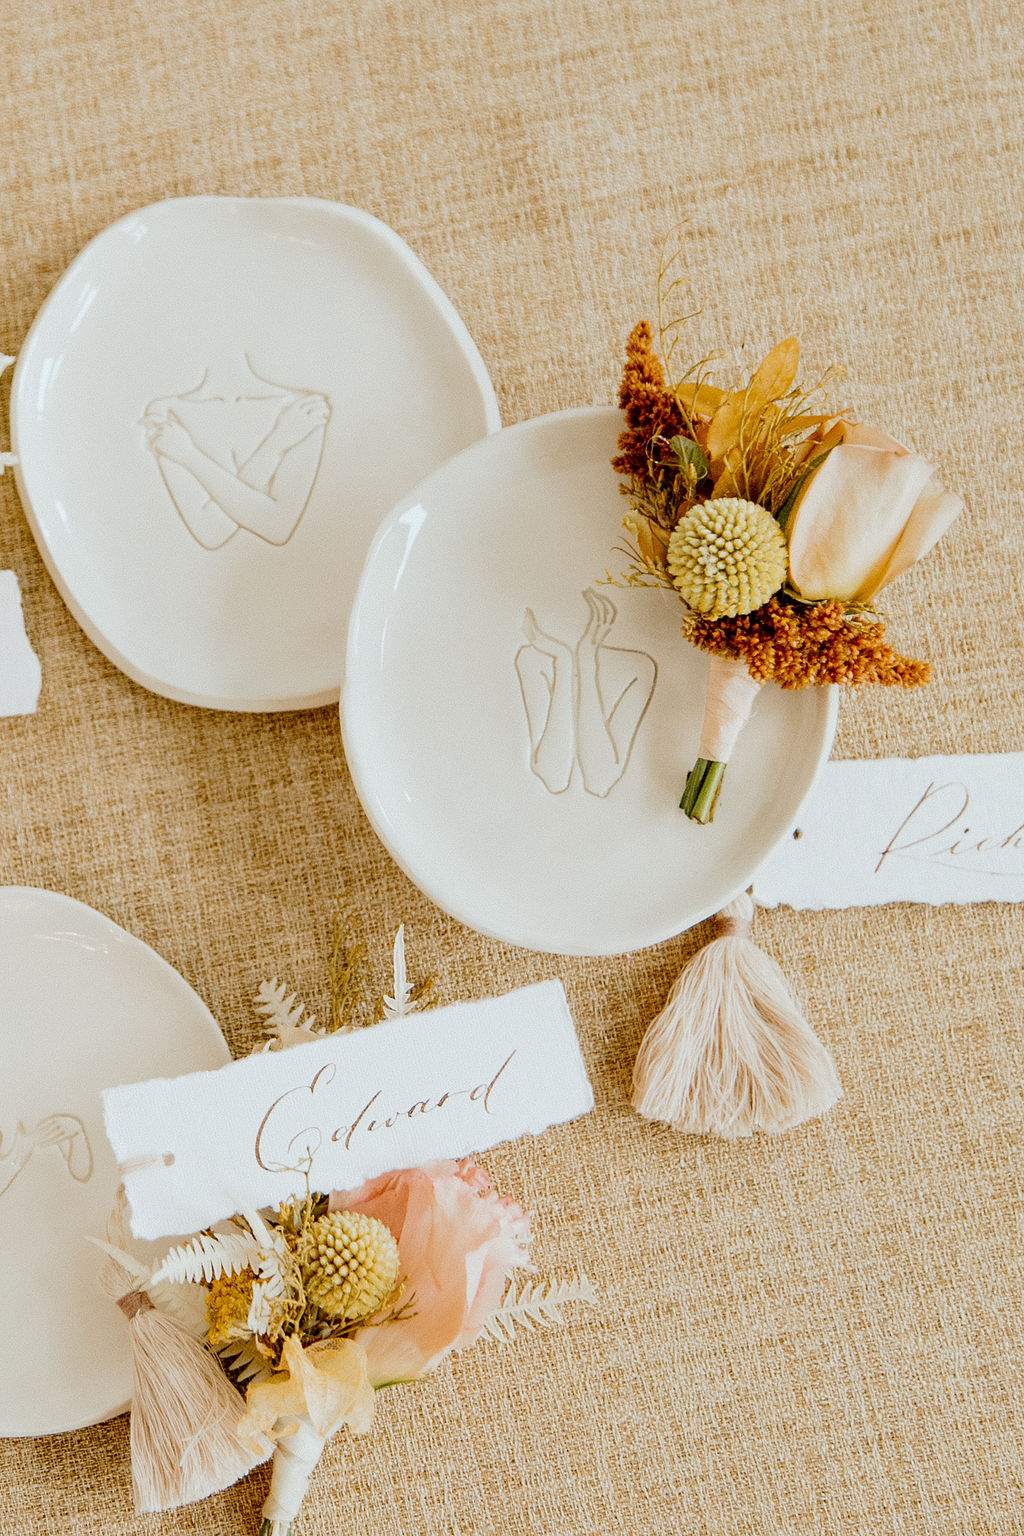 Clay ring dishes for a boho wedding day